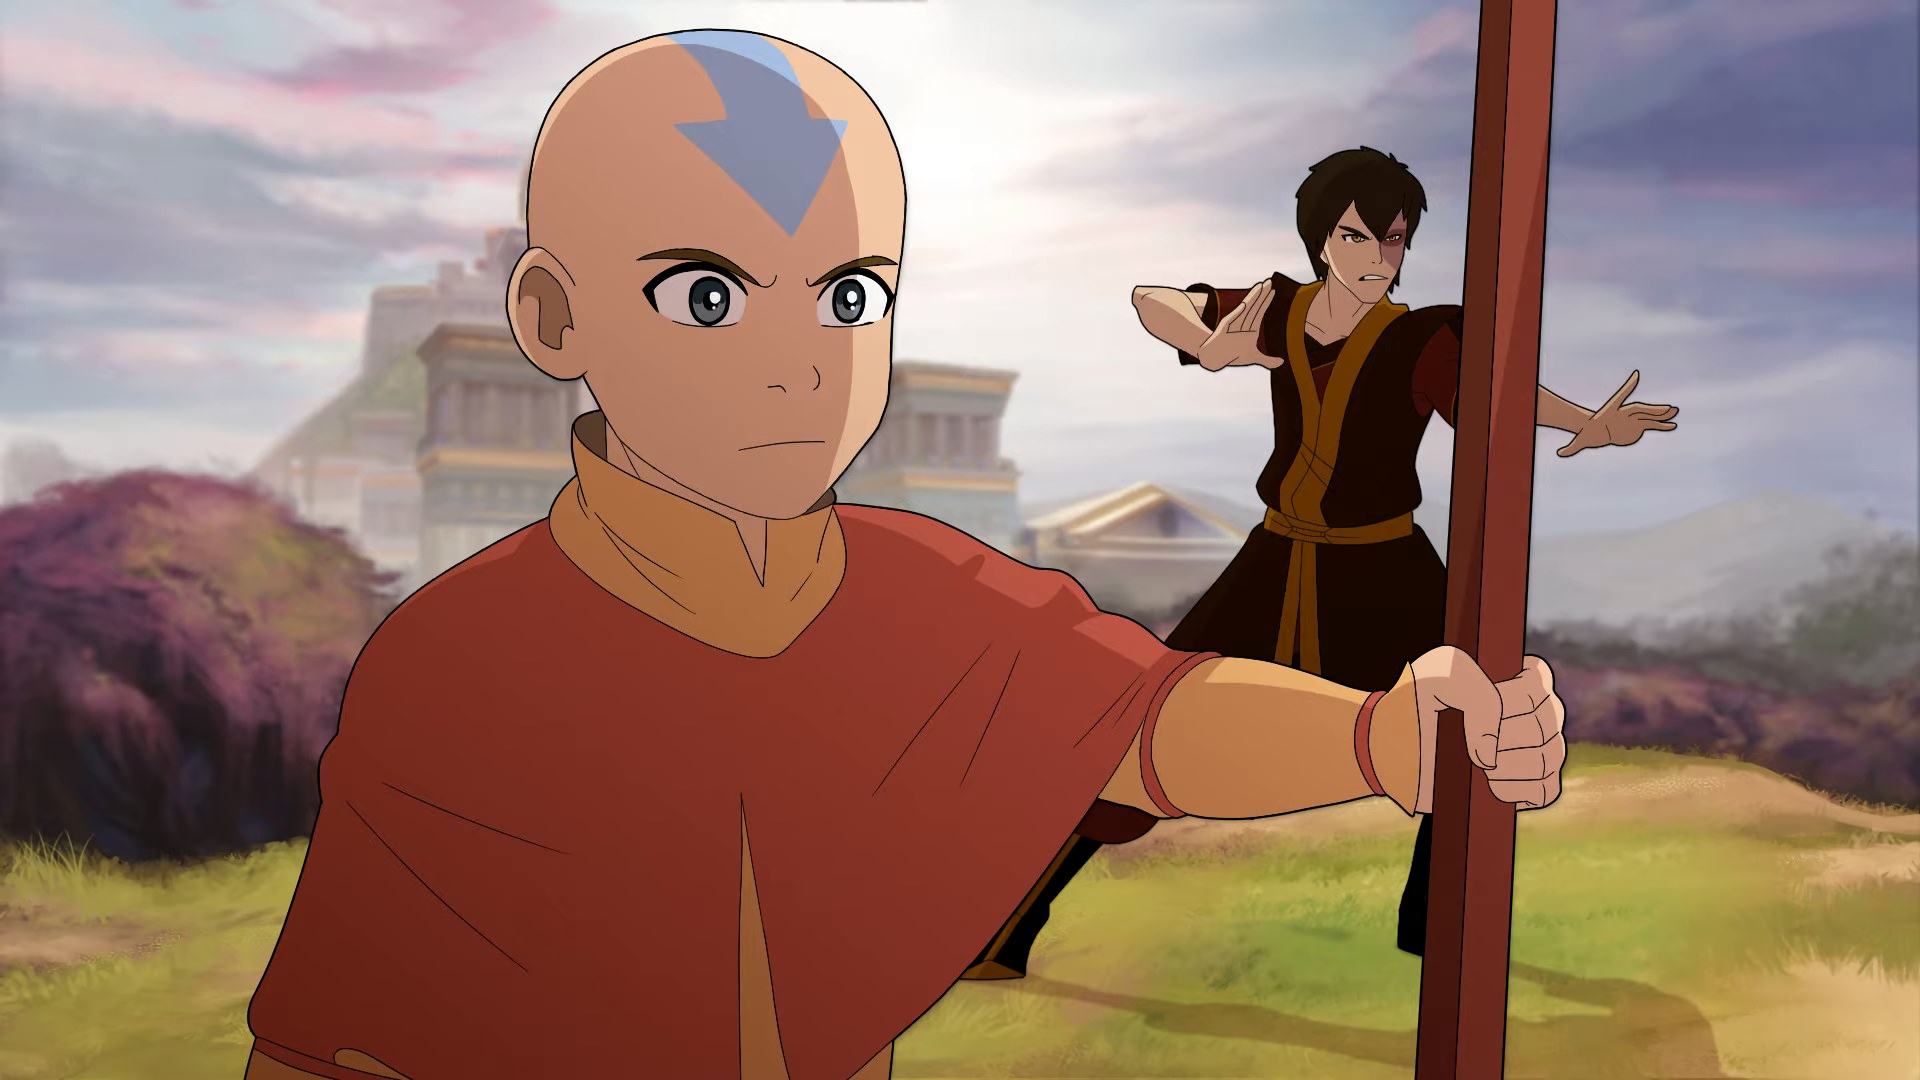 3840x21602021 Aang And Zuko Avatar 3840x21602021 Resolution Wallpaper Hd Anime 4k Wallpapers 1102